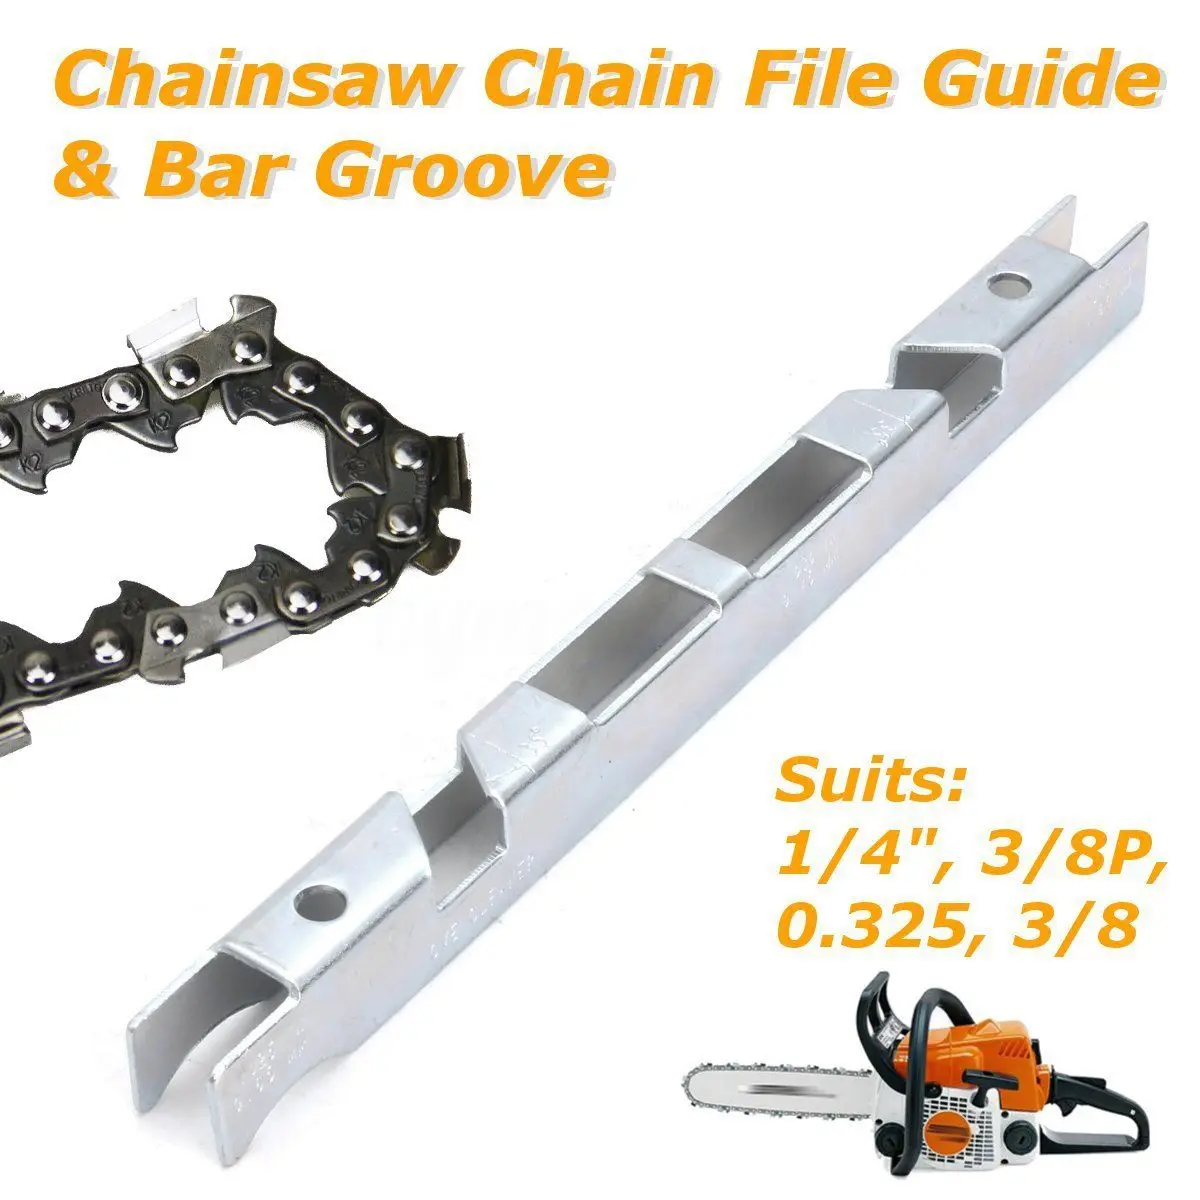 

Depth Gauge File Guide & Bar Groove Universal For 1/4" 3/8" P 0.325" Chain Saw Chainsaw Garden Too Parts Chain Saw Accessories